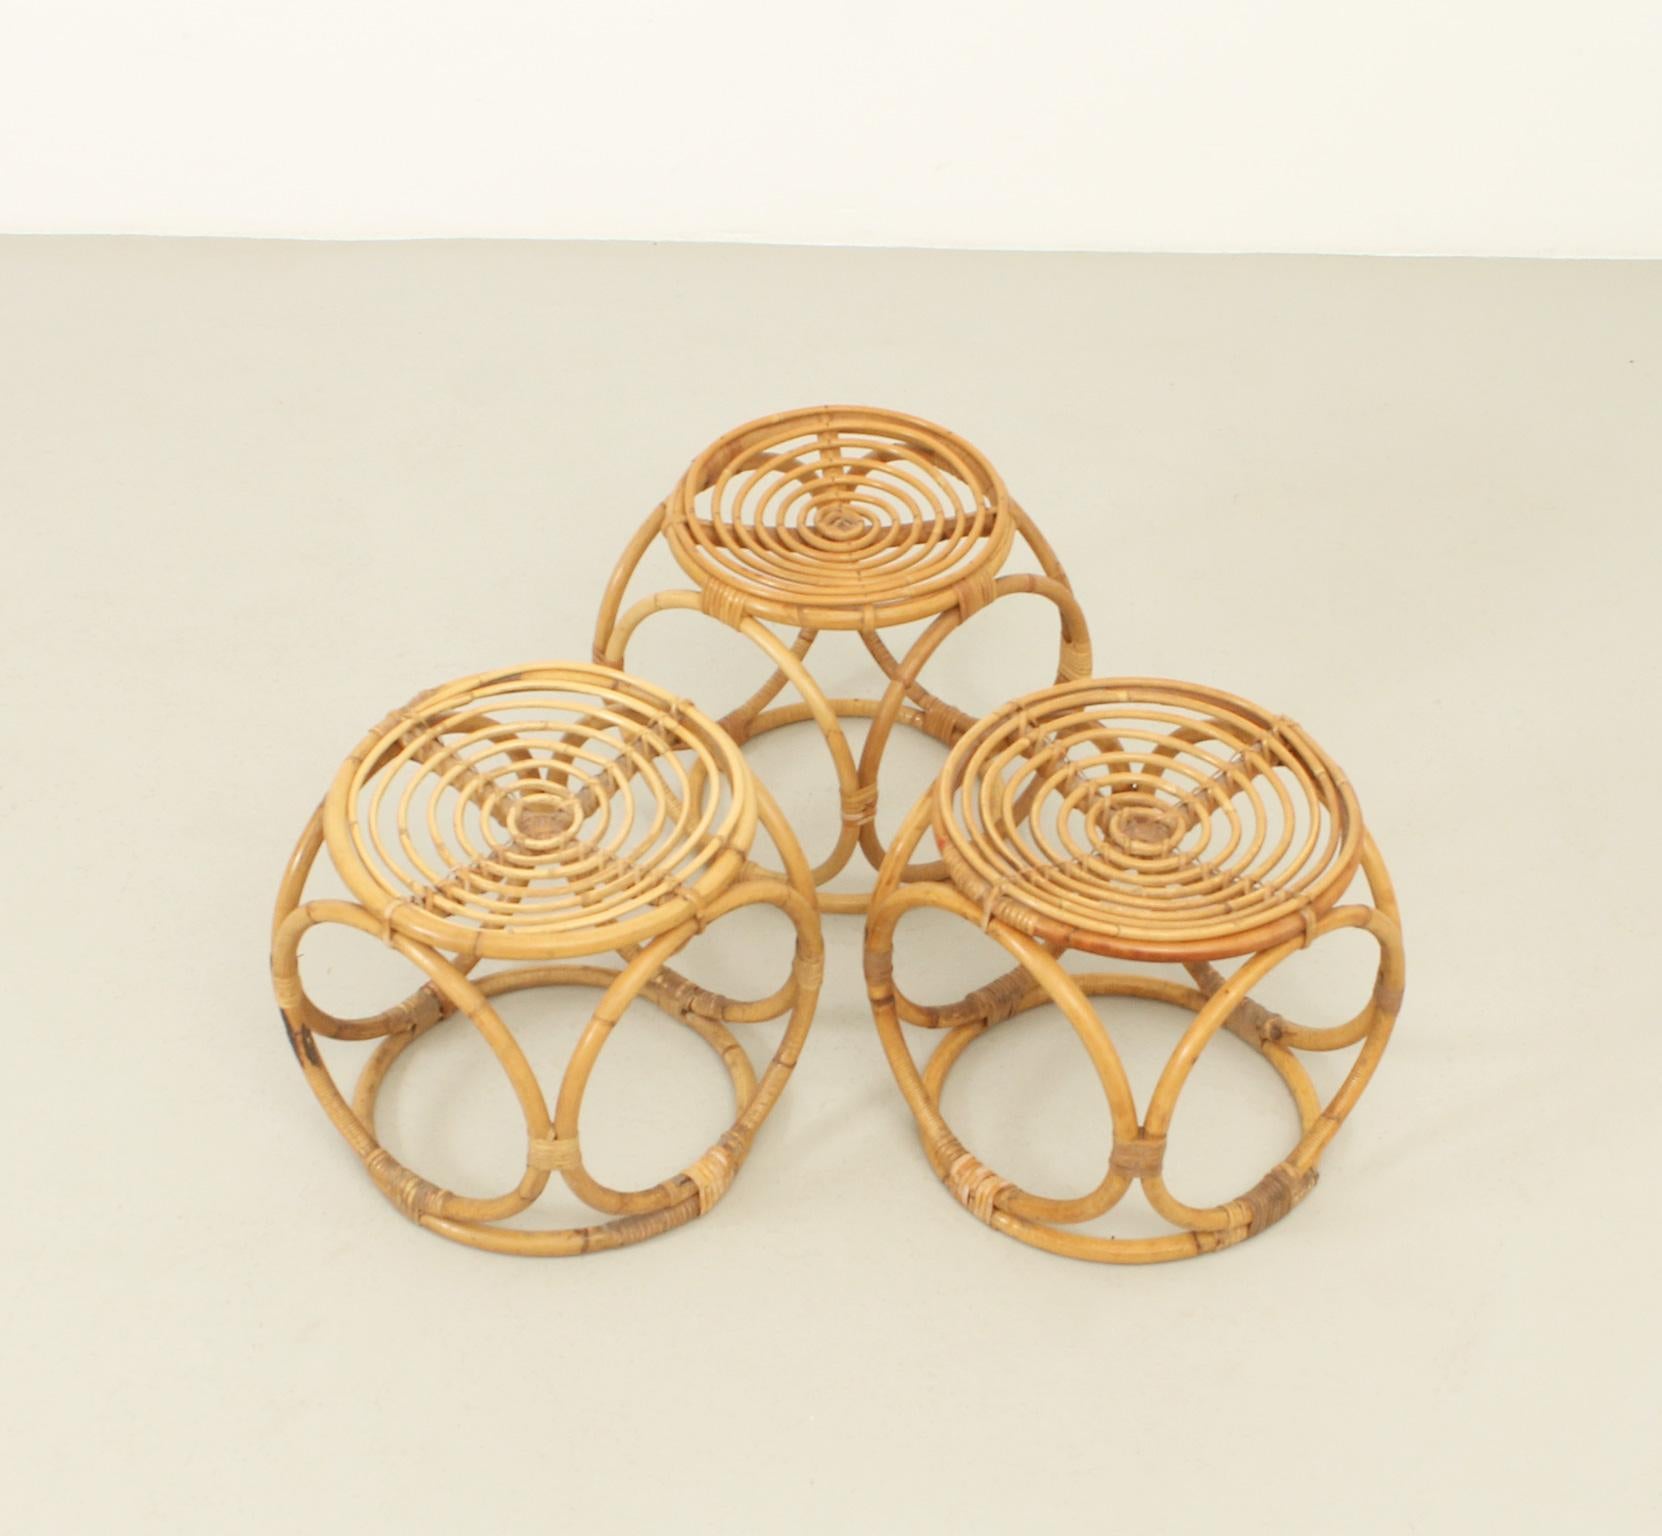 Set of three rattan stools from 1970's, Spain. Made with woven rattan with circular pieces. 